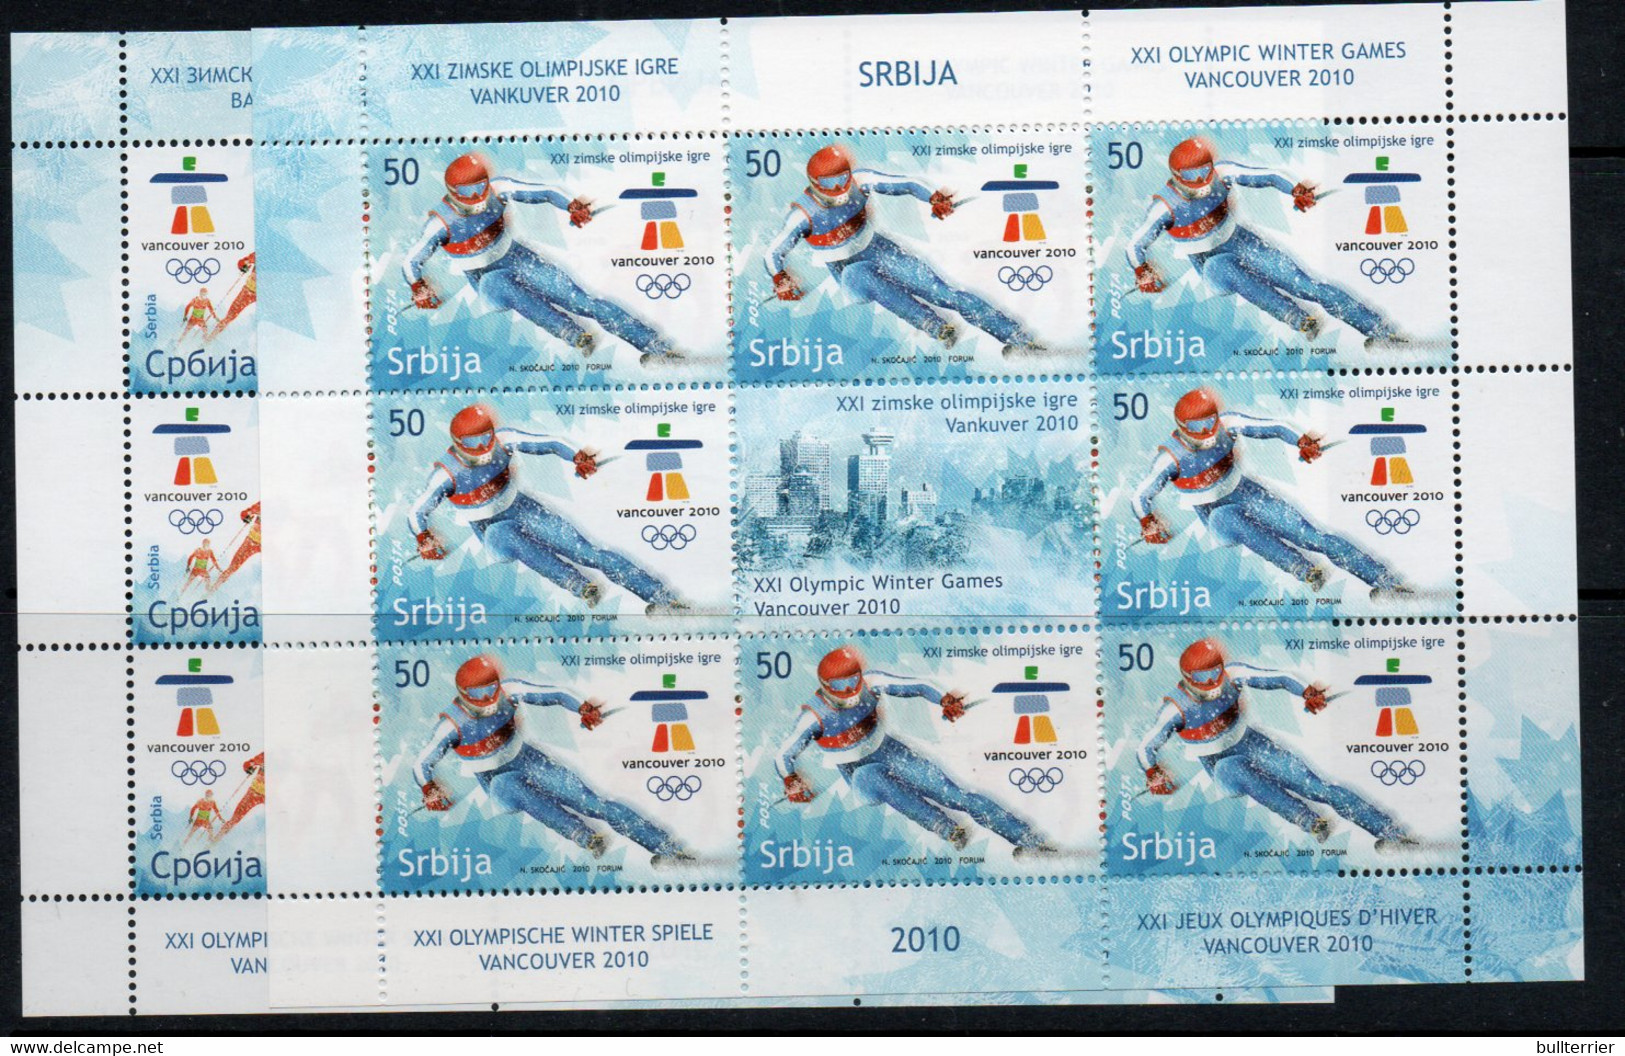 OLYMPICS  -  SERBIA - 2010  - VANCOUVER WINTER OLYMPICS SHEETLETS OF 8 + LABELS  MINT NEVER HINGED - Winter 2010: Vancouver